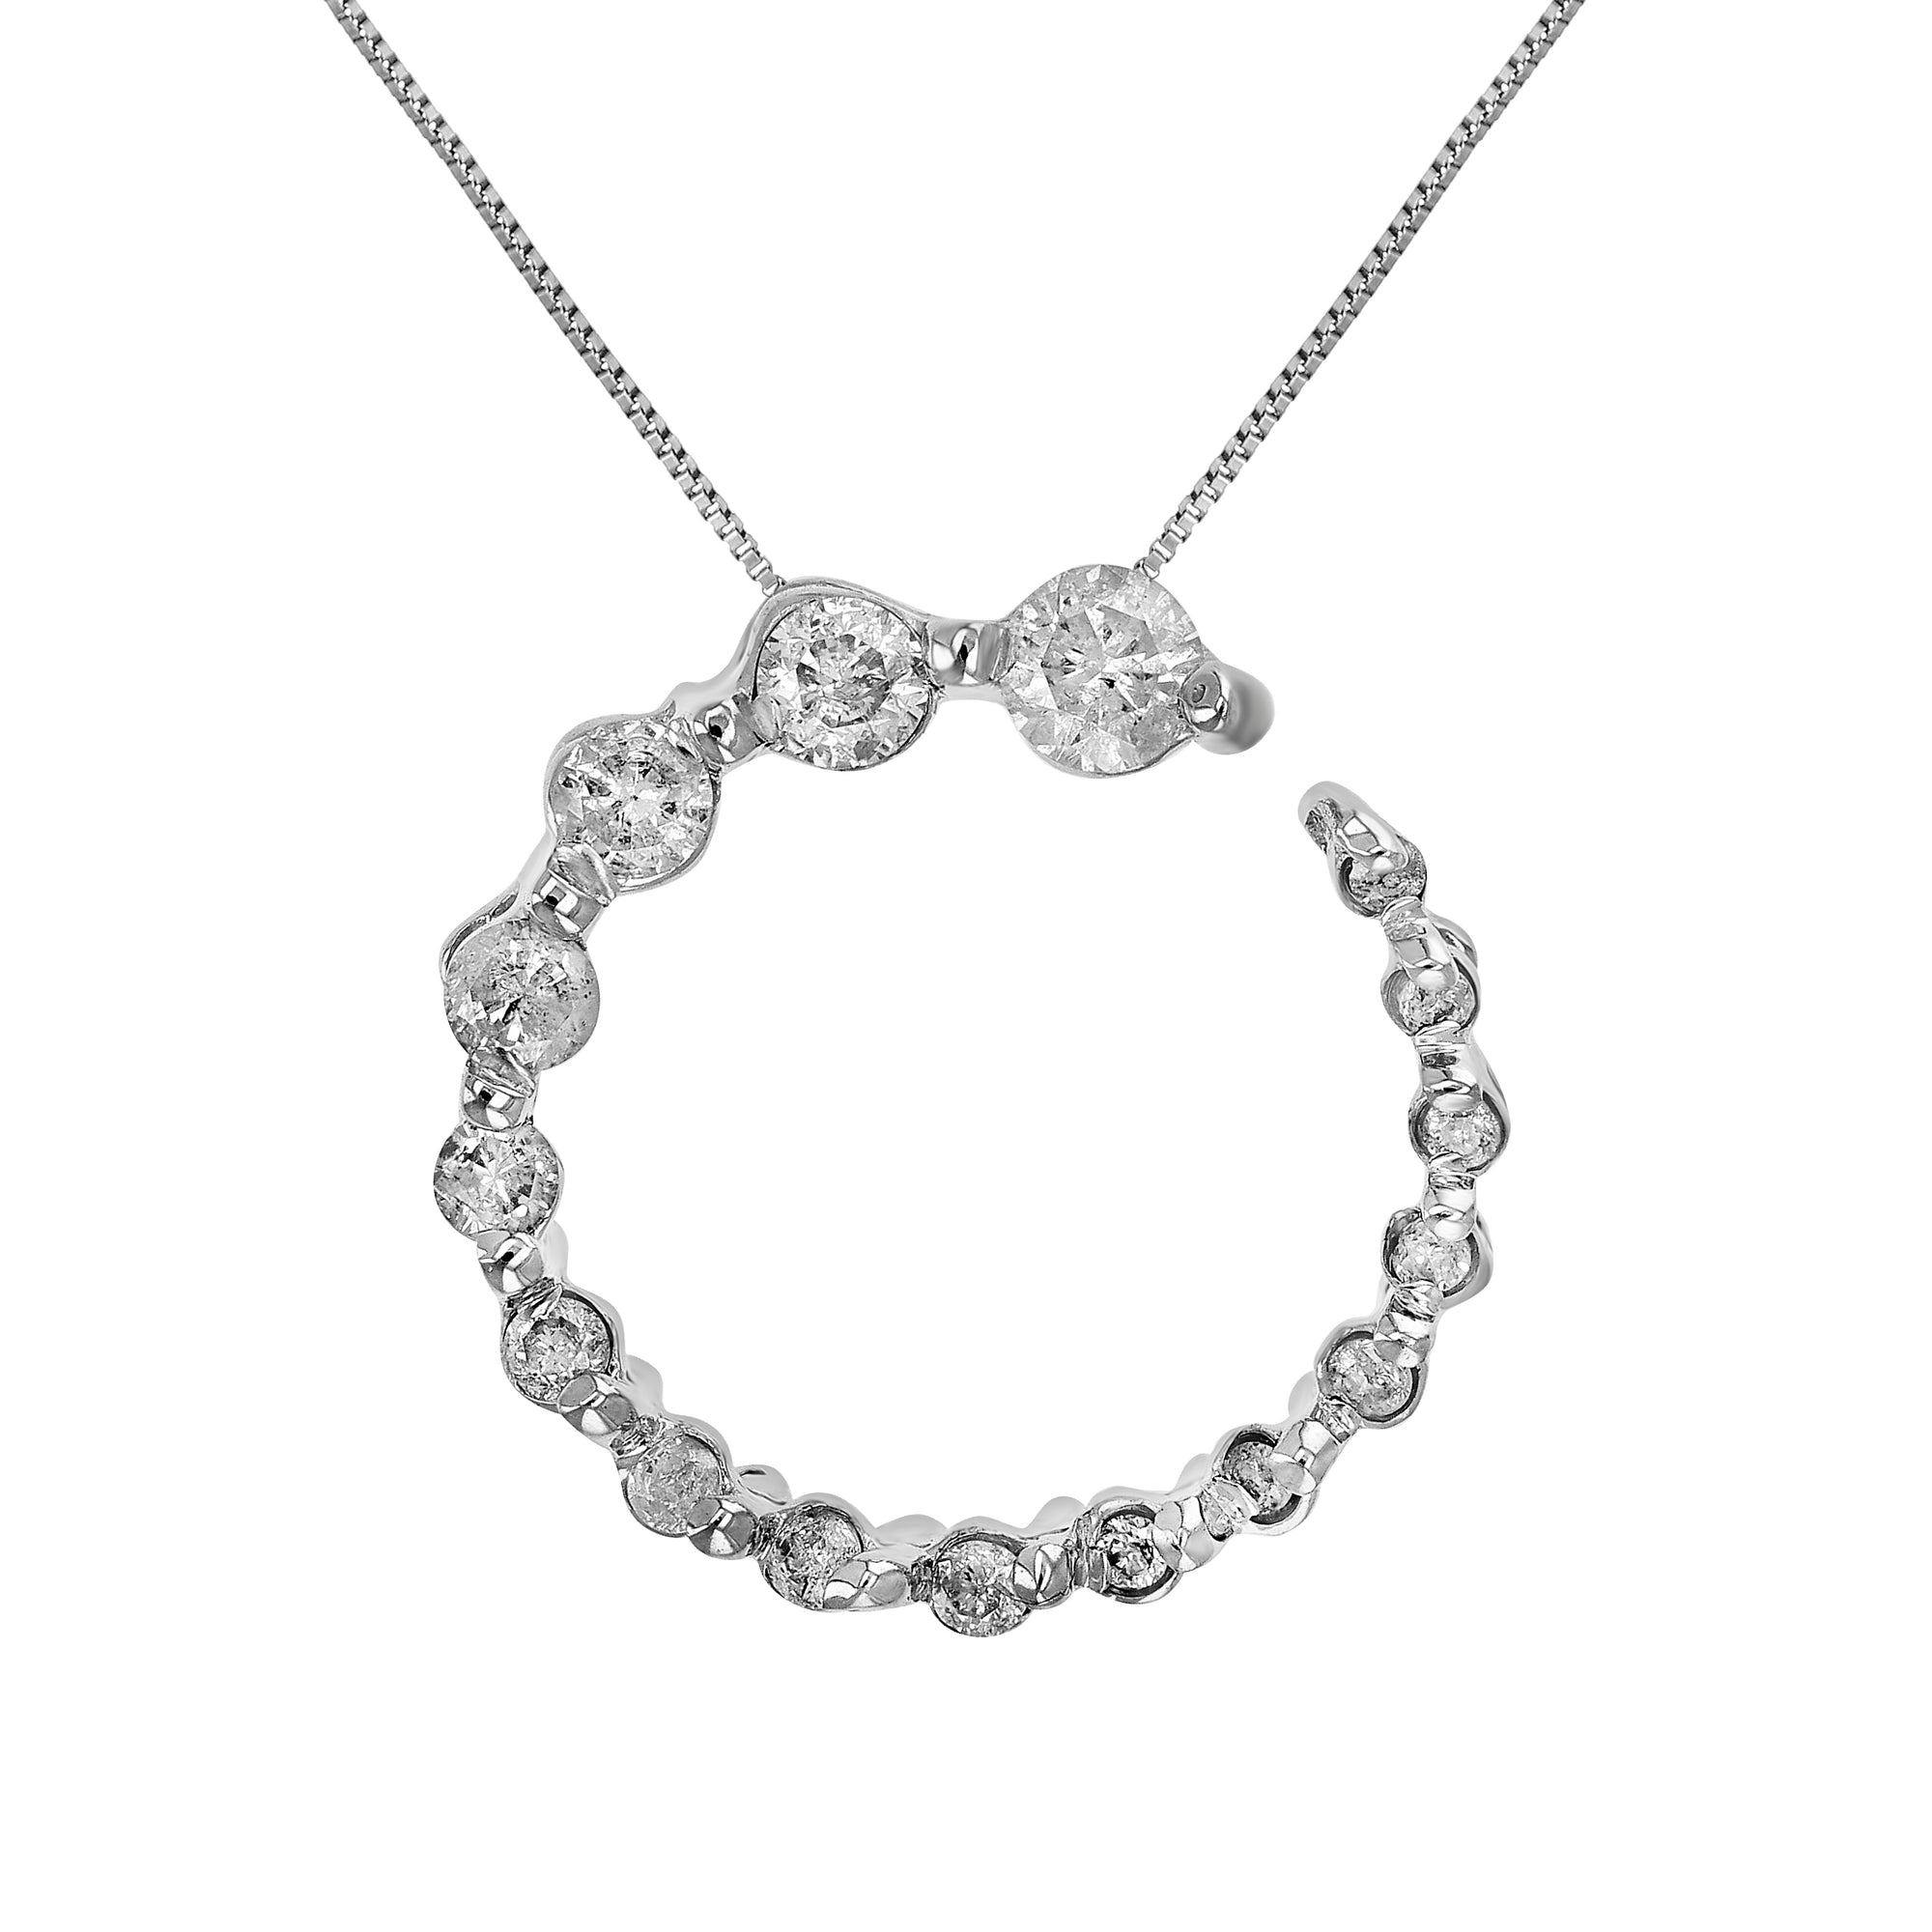 1/4 cttw Diamond Pendant, Diamond Journey Circle Pendant Necklace for Women in 14K White Gold with 18 Inch Chain, Prong Setting